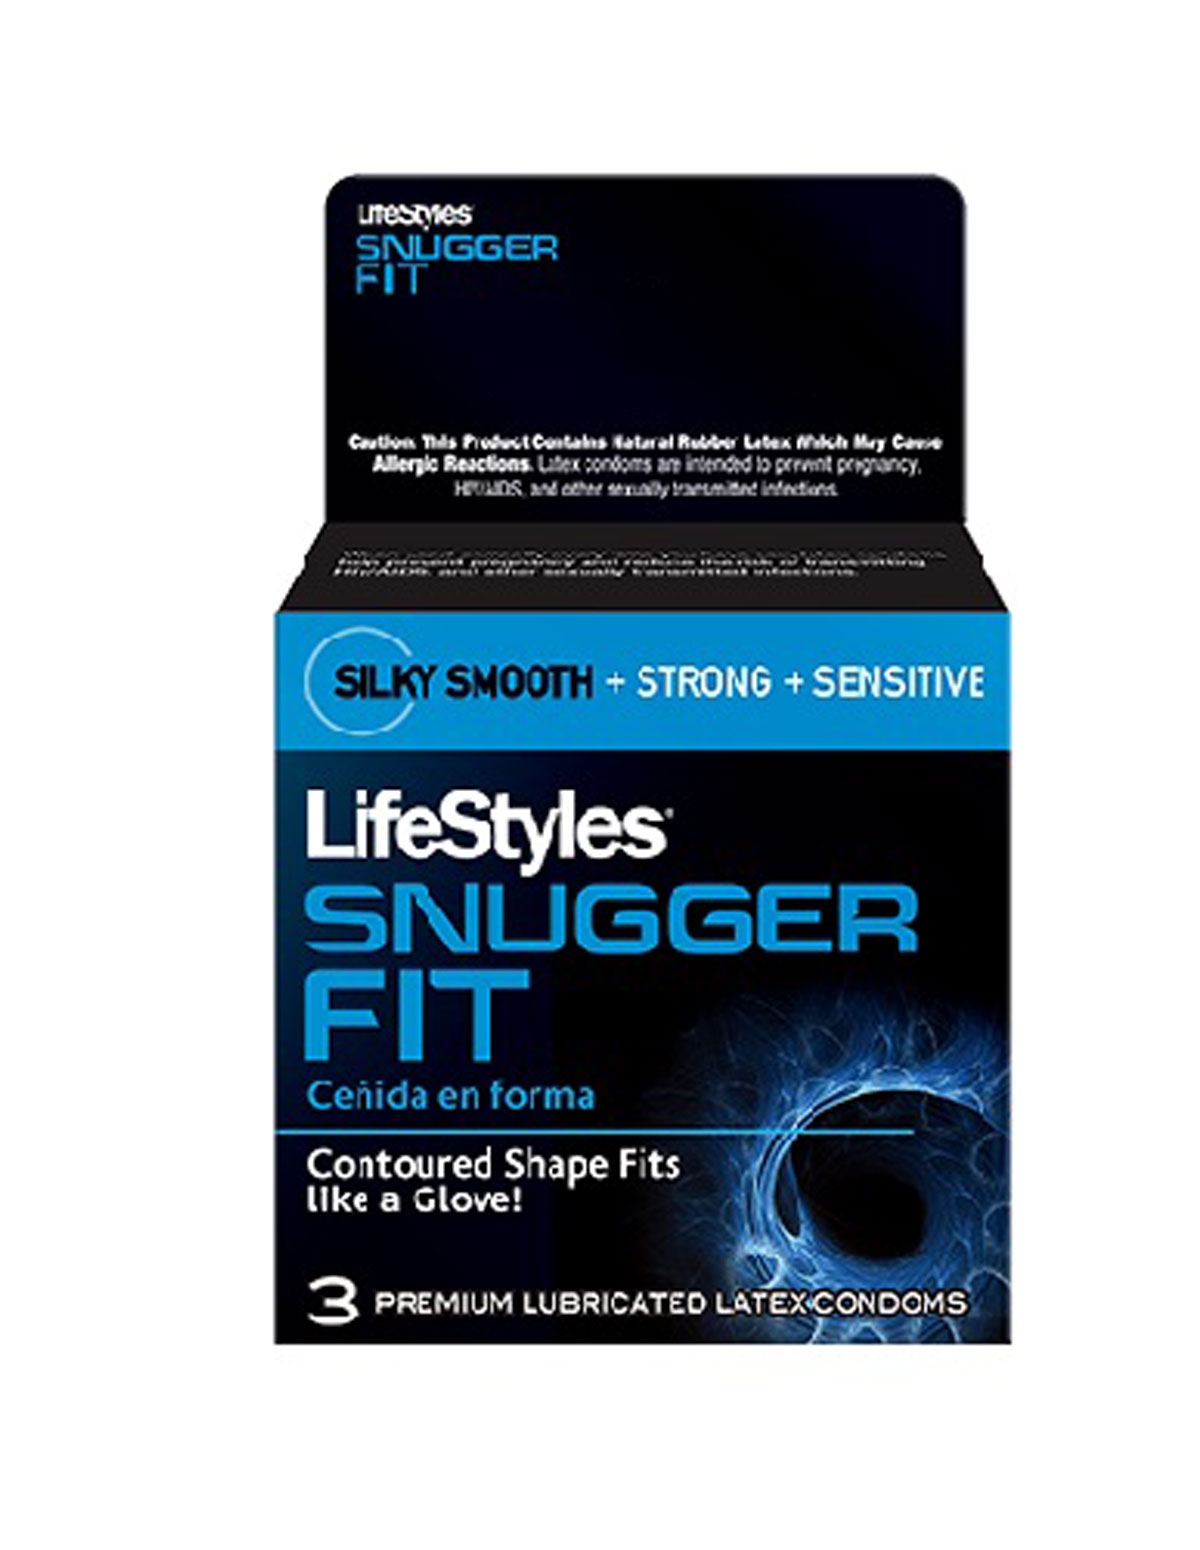 Where To Buy Lifestyles Snugger Fit Condoms Welcome To Aliso